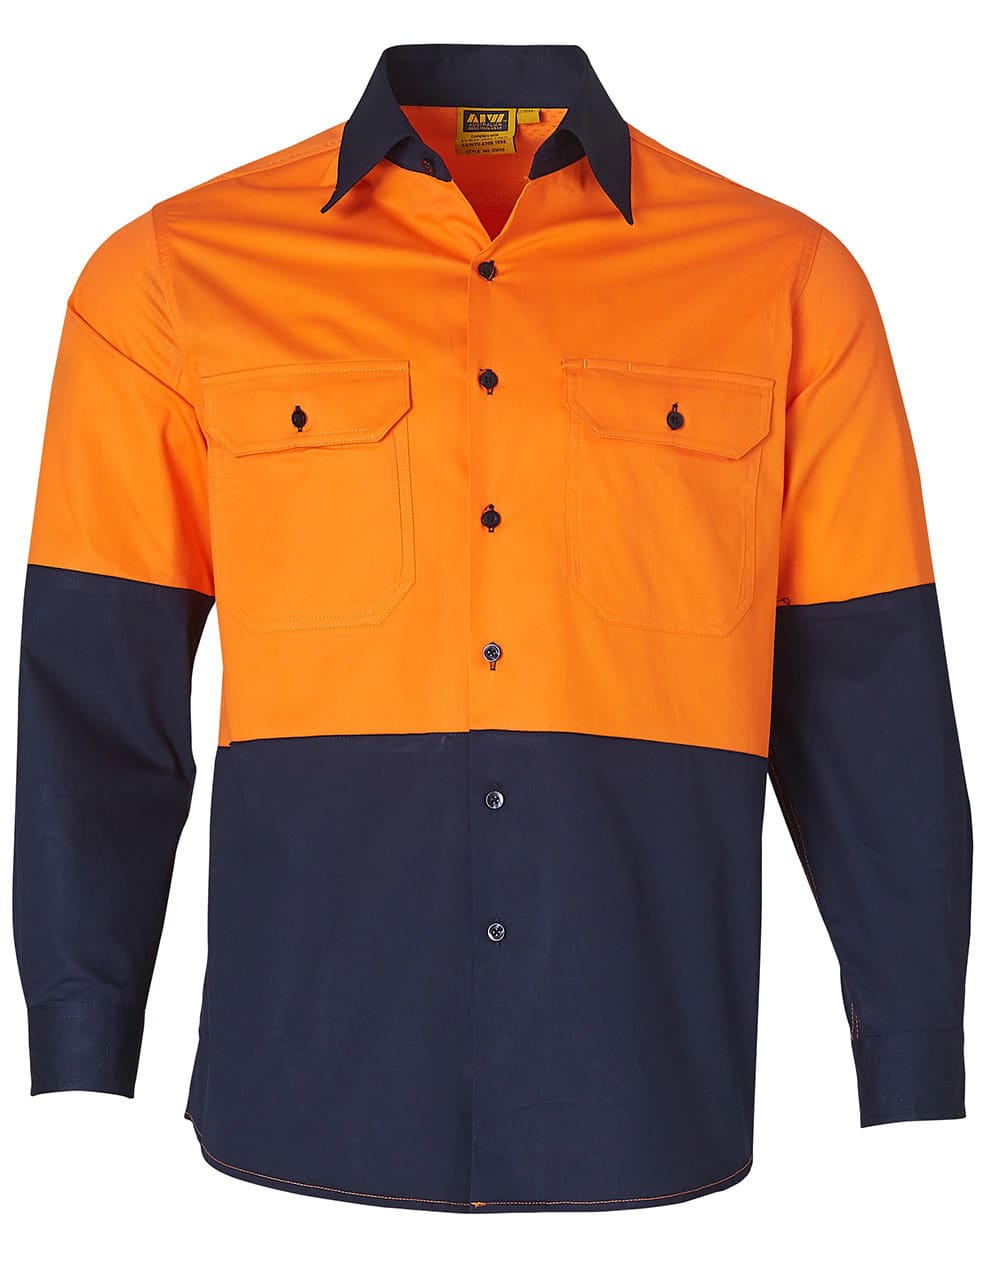 Mens High Visibility Cool-Breeze Cotton Twill Safety Shirt SW58 | Orange/Navy